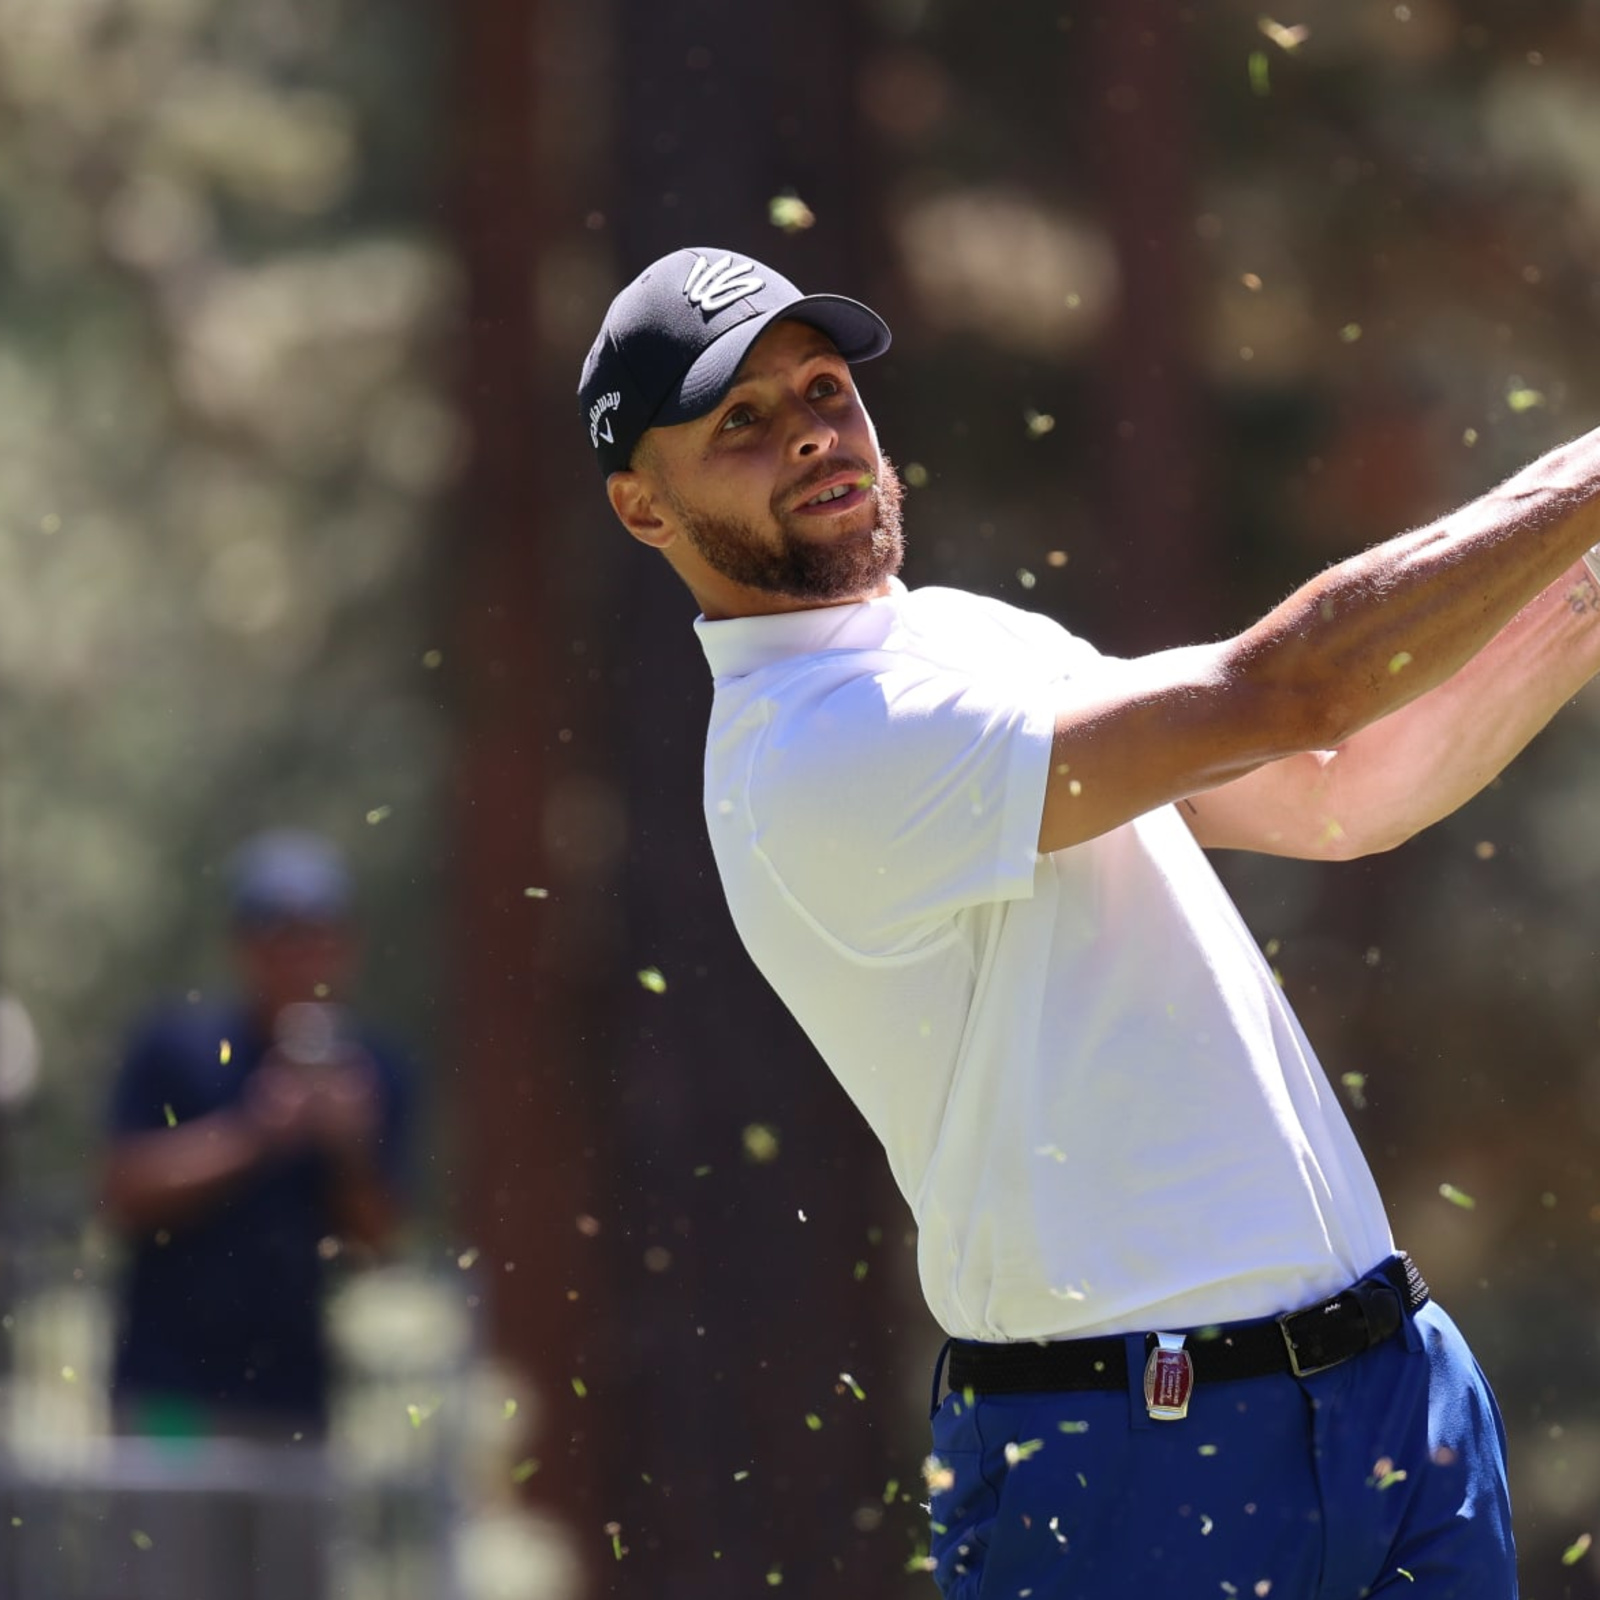 Stephen Curry Eagles 18th to Win American Century Golf Championship;  Mahomes 62nd, News, Scores, Highlights, Stats, and Rumors